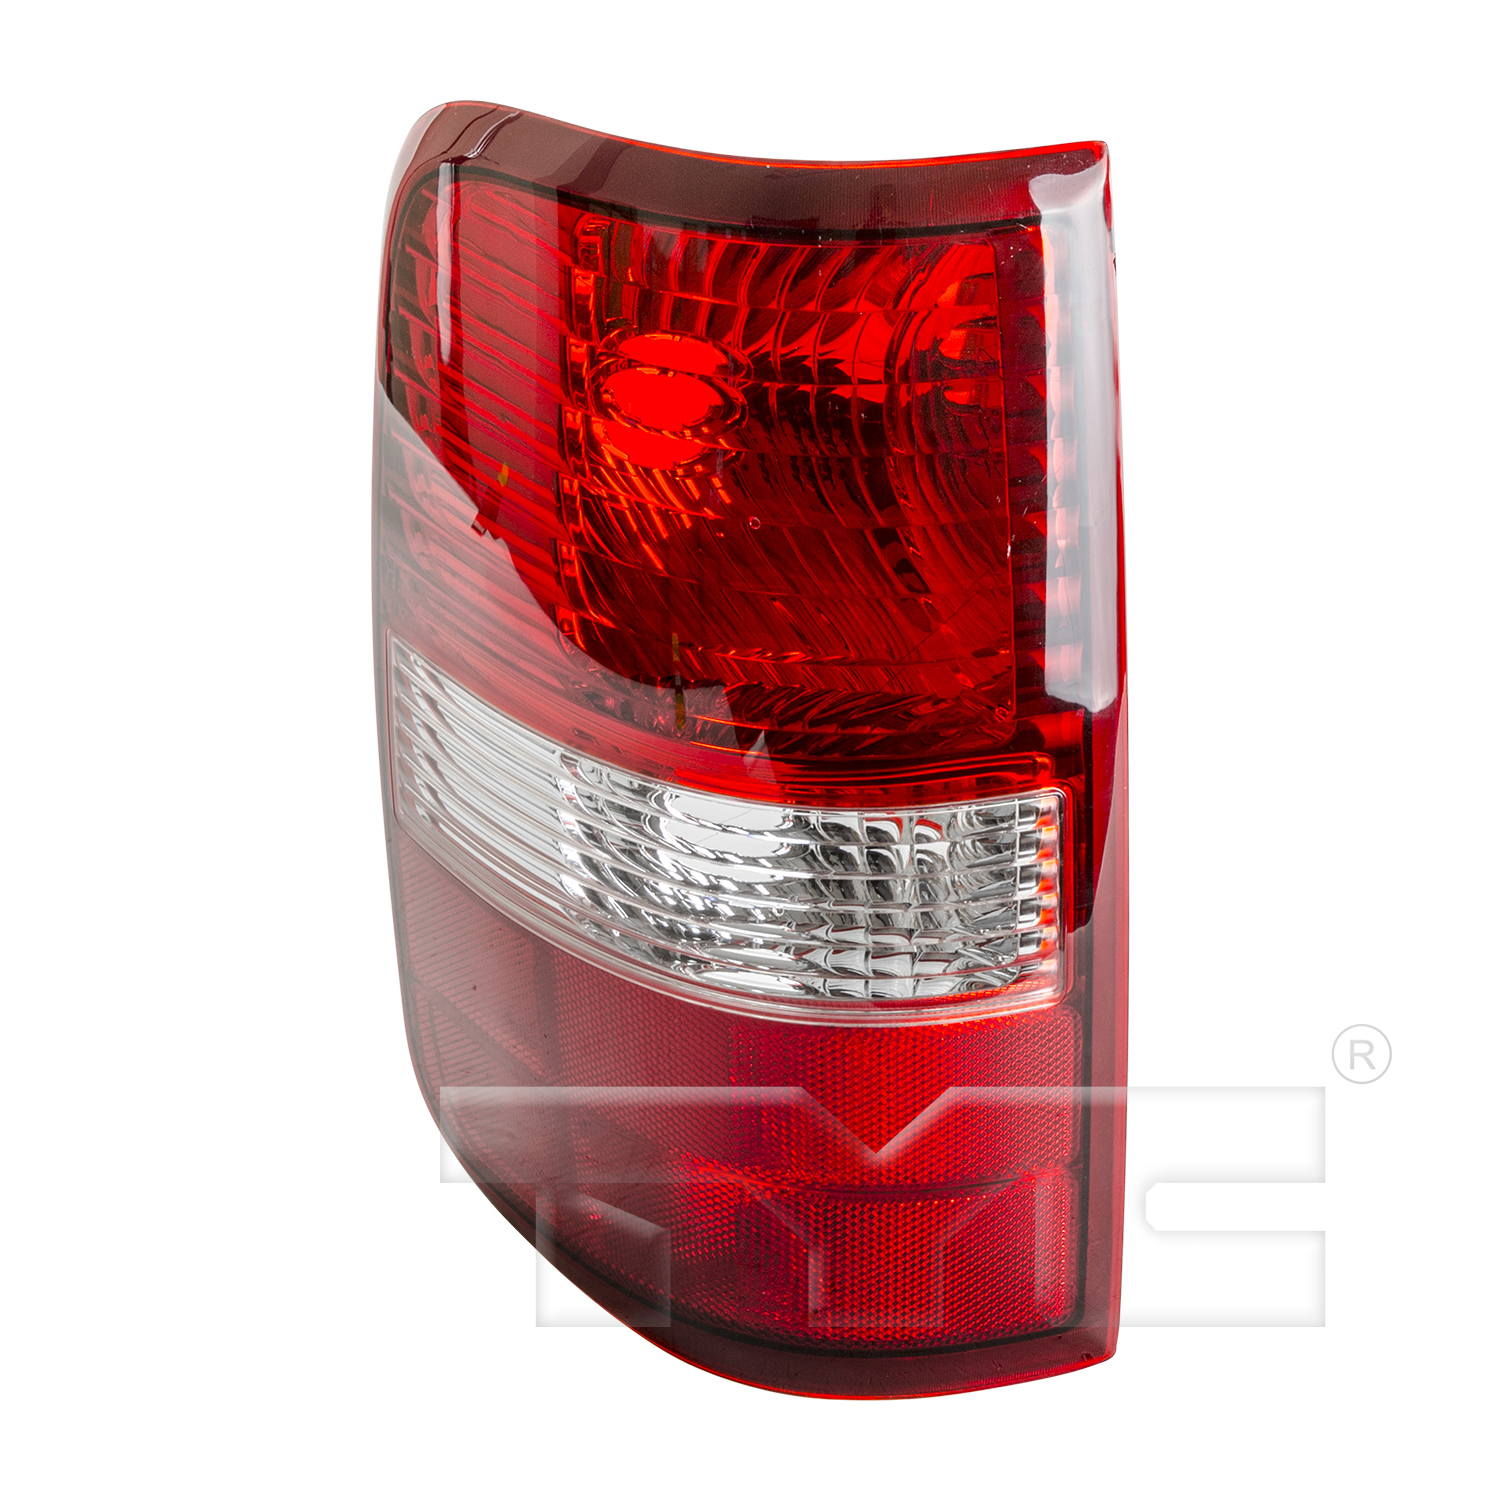 Aftermarket TAILLIGHTS for FORD - F-150, F-150,04-06,LT Taillamp assy